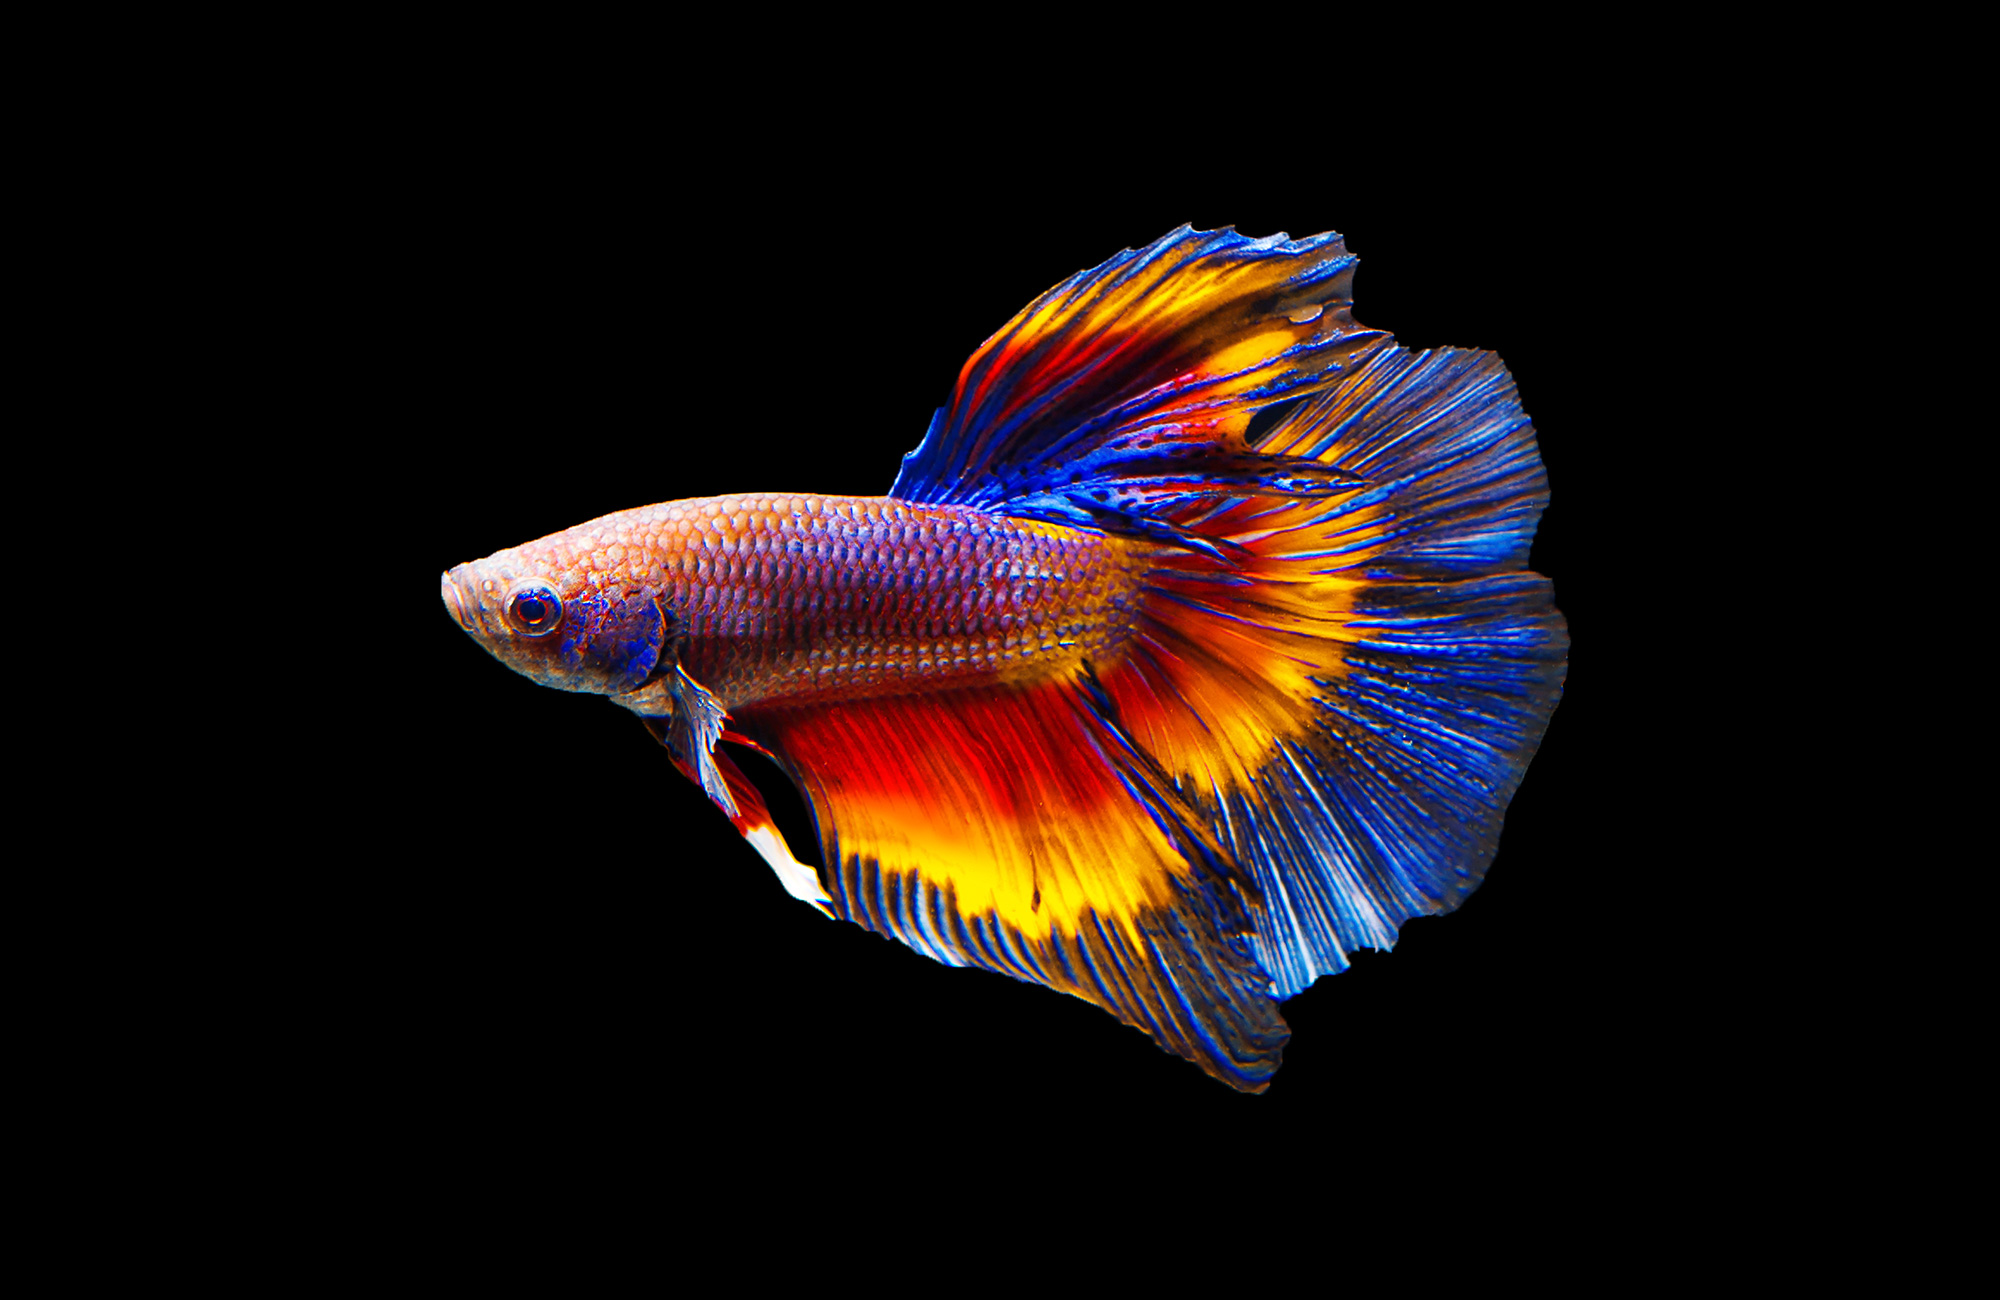 How often should you feed a betta fish?